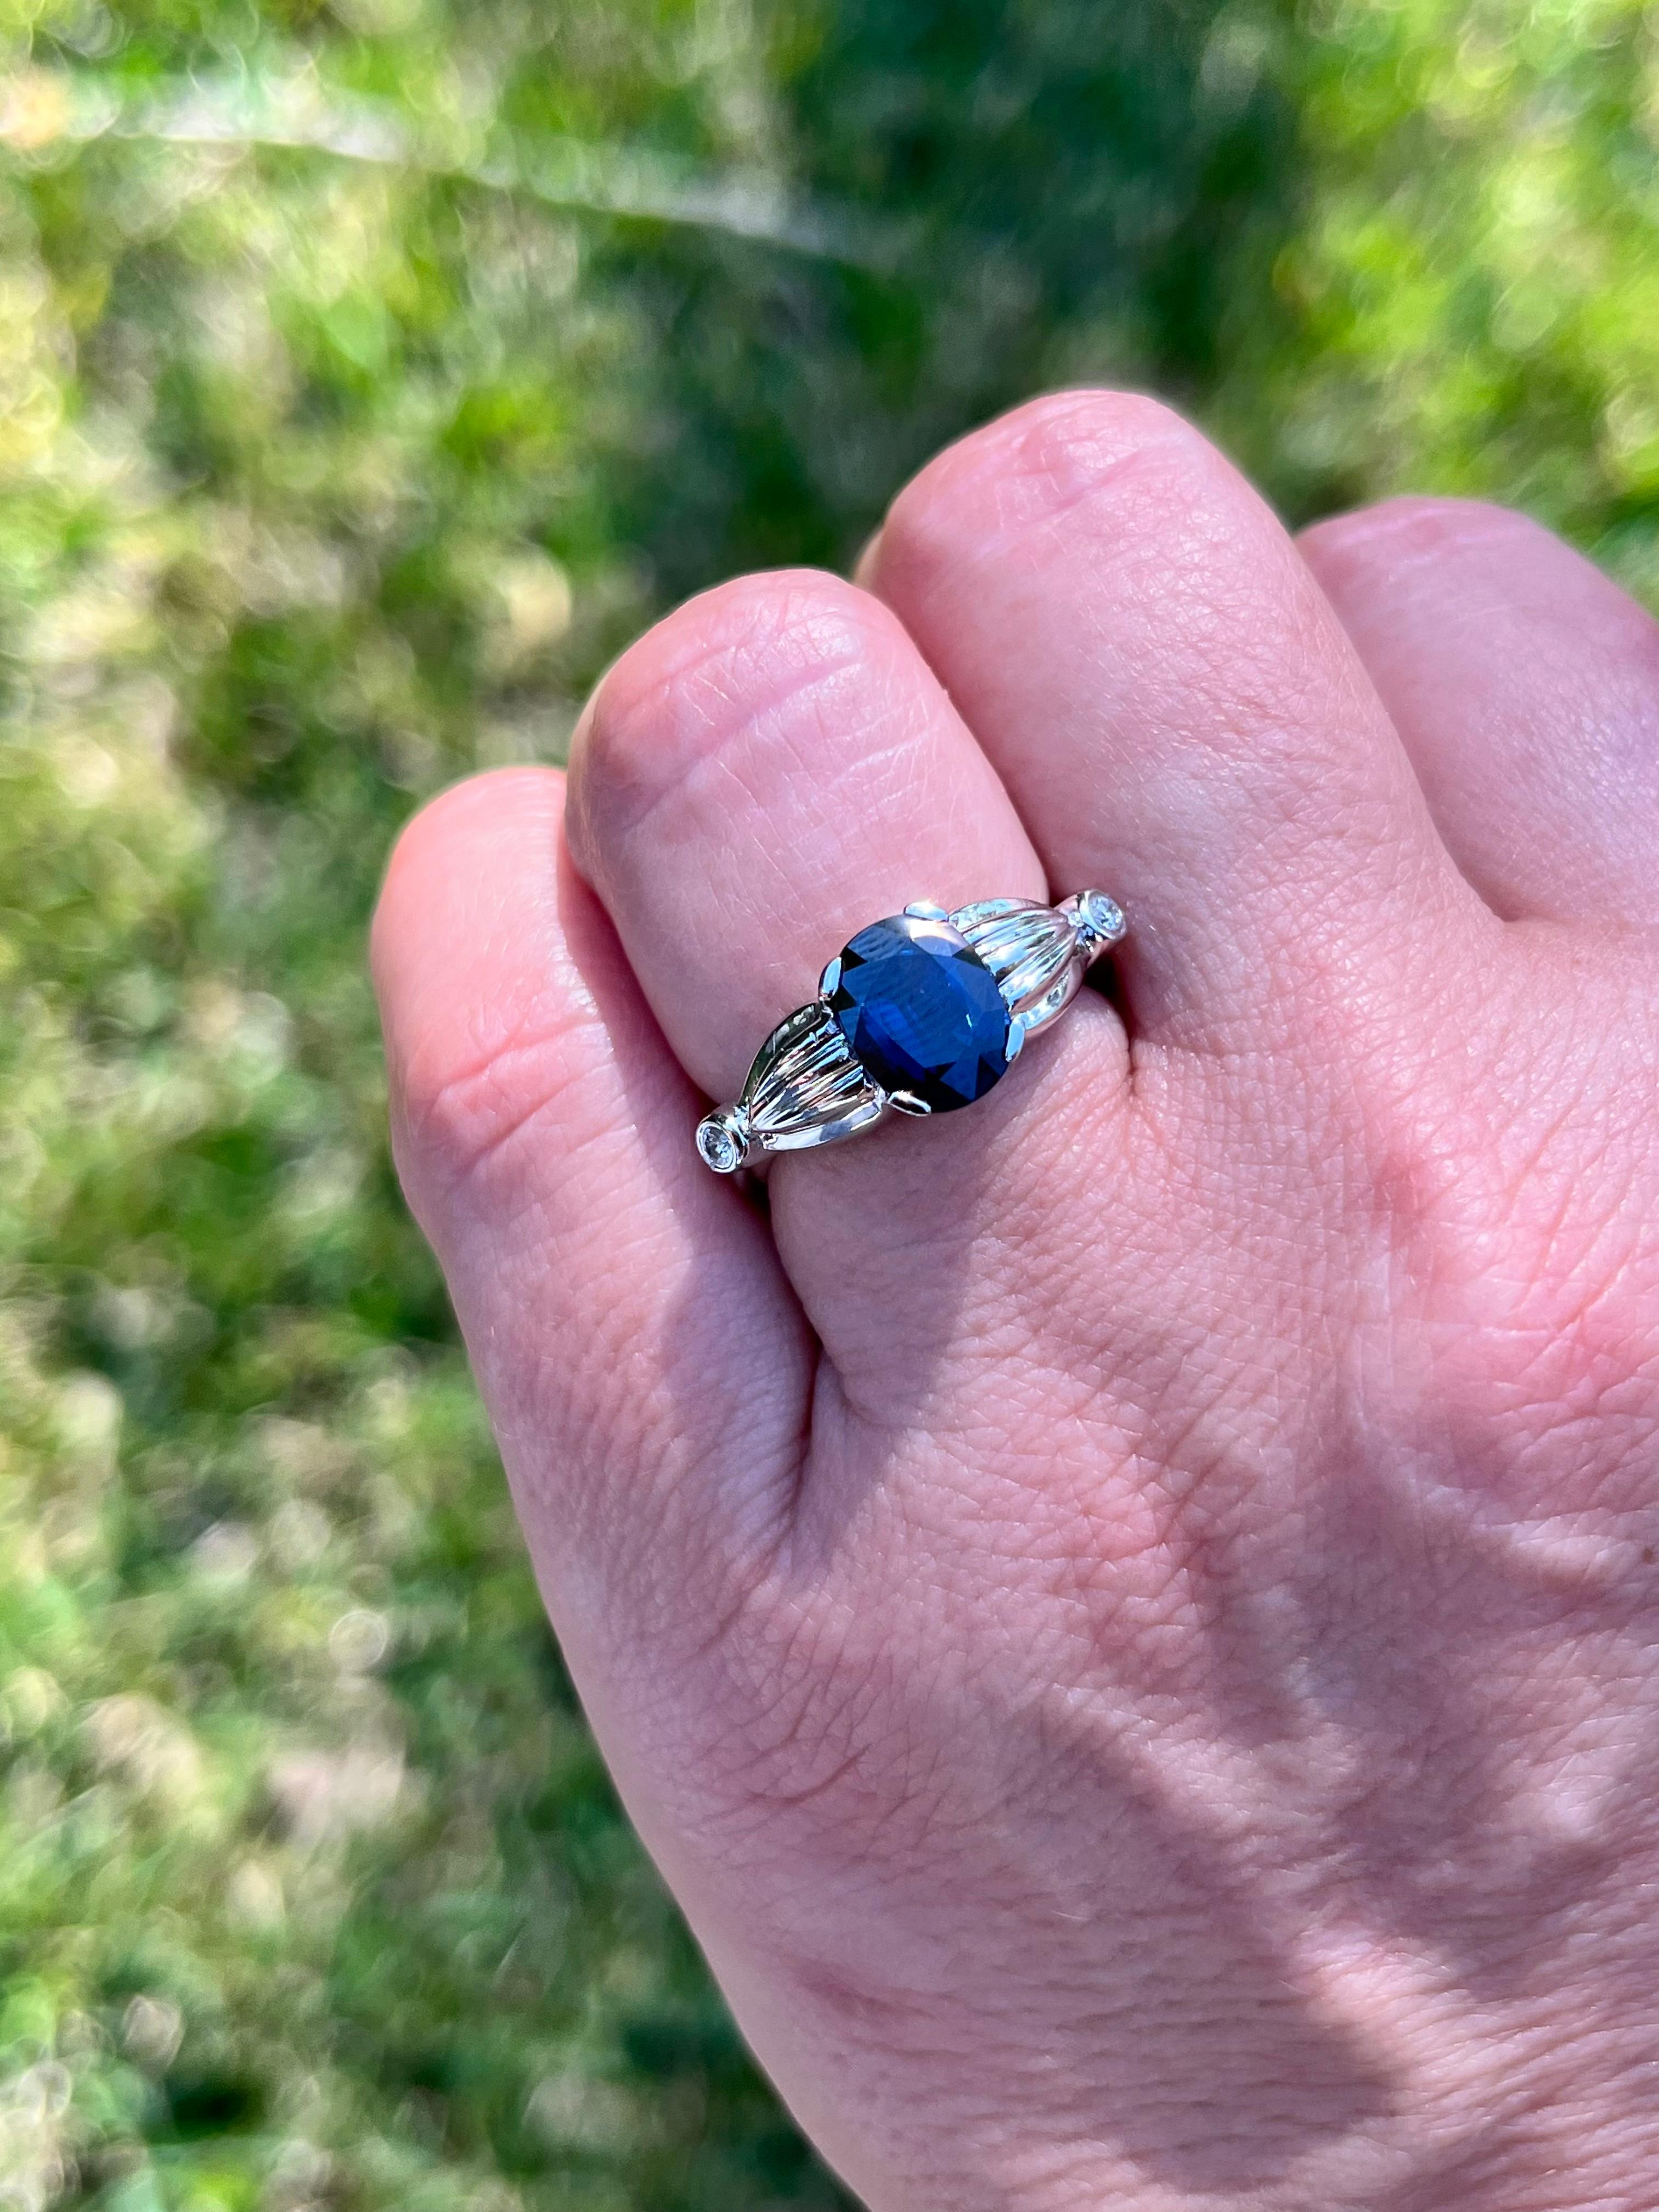 2.50 carat oval cut Blue Sapphire set with 2 diamond accents in a 14k white gold ring. The ring is made with an open split shank that securely wraps around the finger for a comfortable fit. Double Rhodium plated for a long-lasting shine. Waterproof,